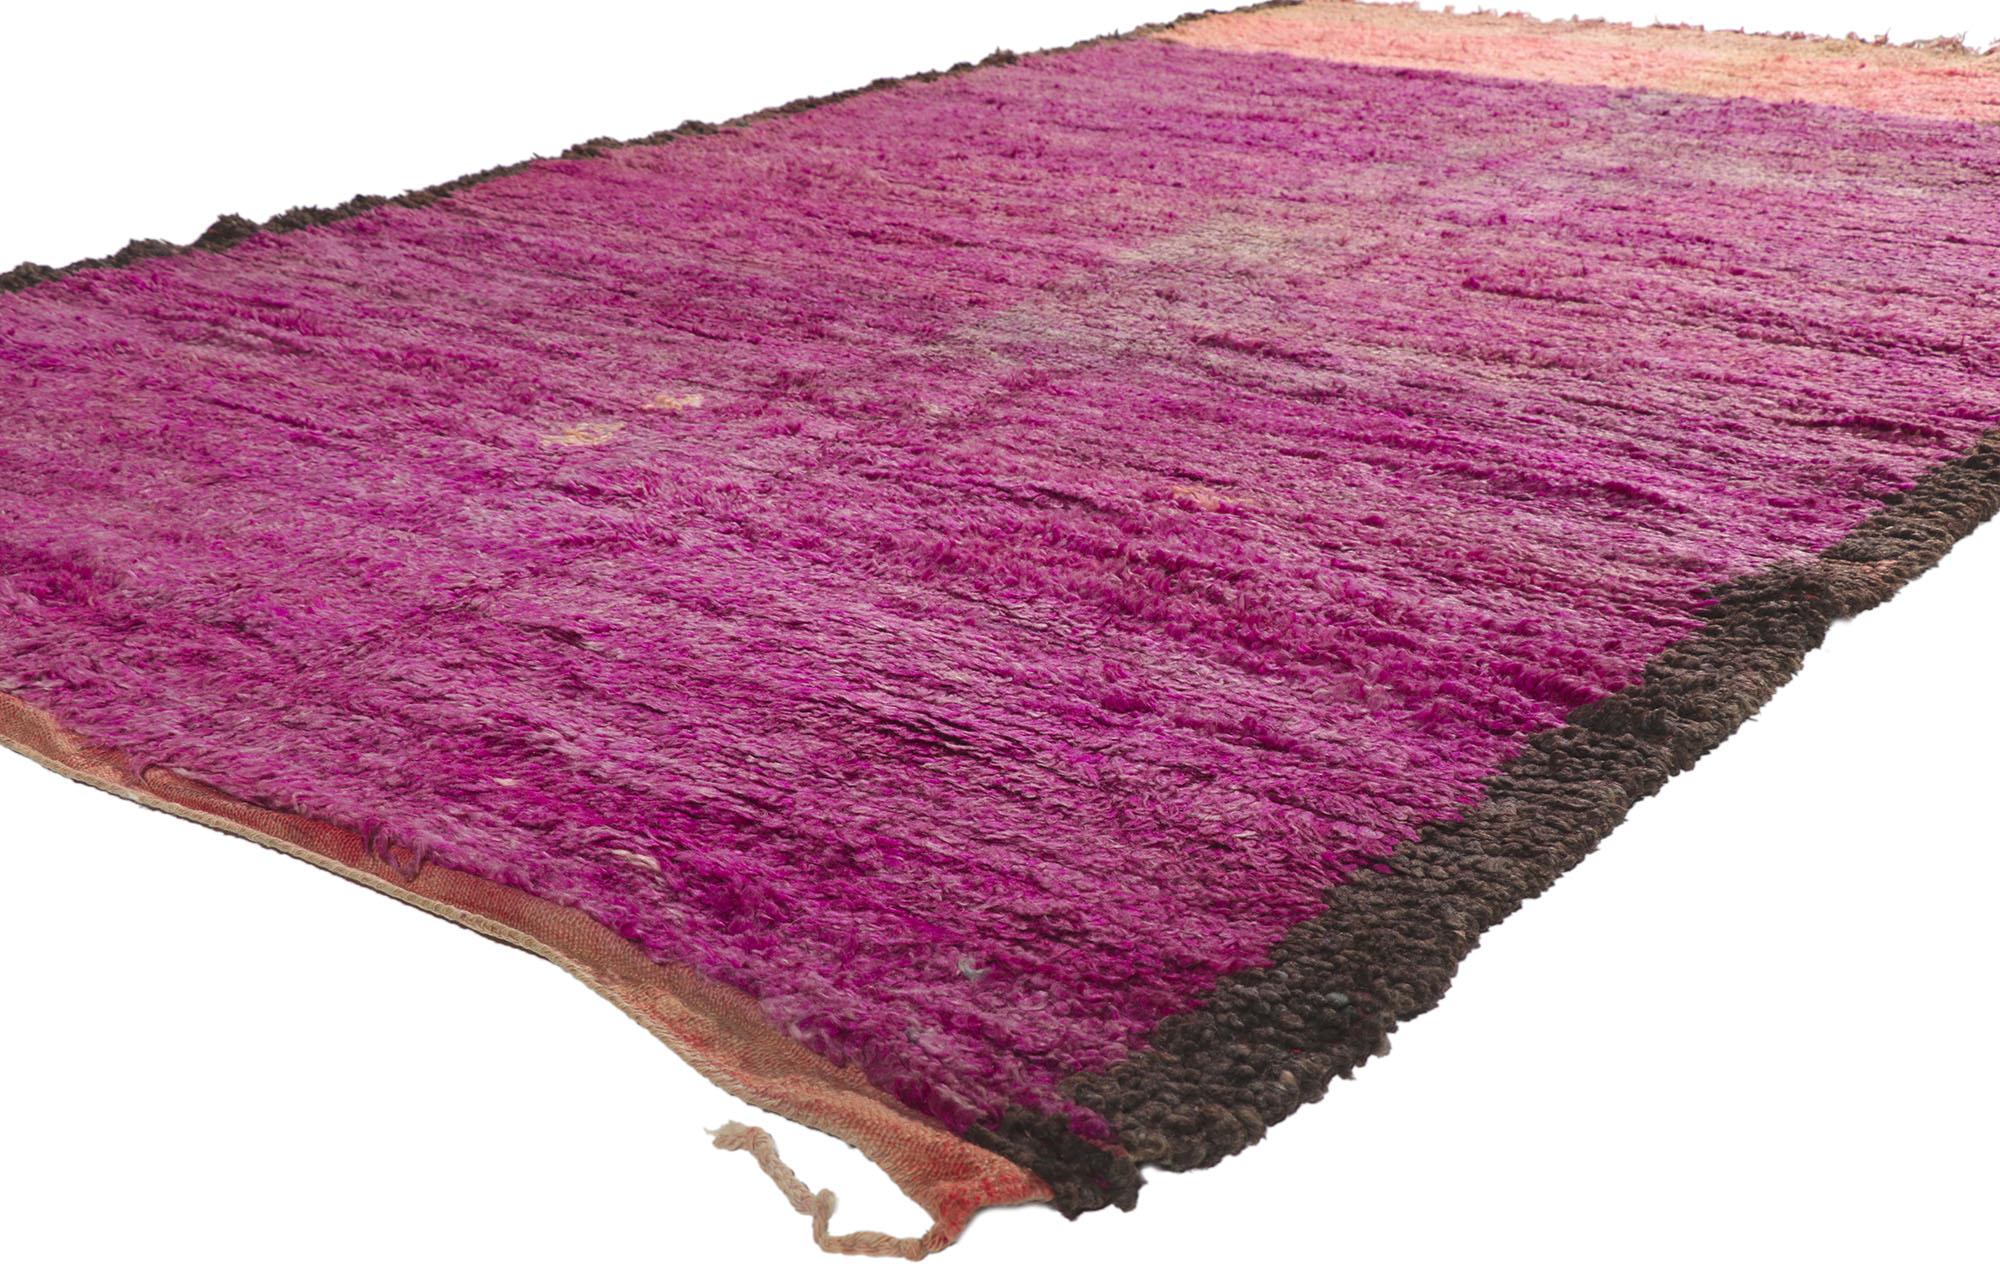 21219 Vintage Beni Mrirt Moroccan Rug, 06'00 x 09'07.
Effortless beauty and simplicity meets the eye in this hand-knotted wool vintage Beni Mrirt Moroccan rug. Imbued with magenta and pink hues, the rich waves of abrash of painterly-like brush